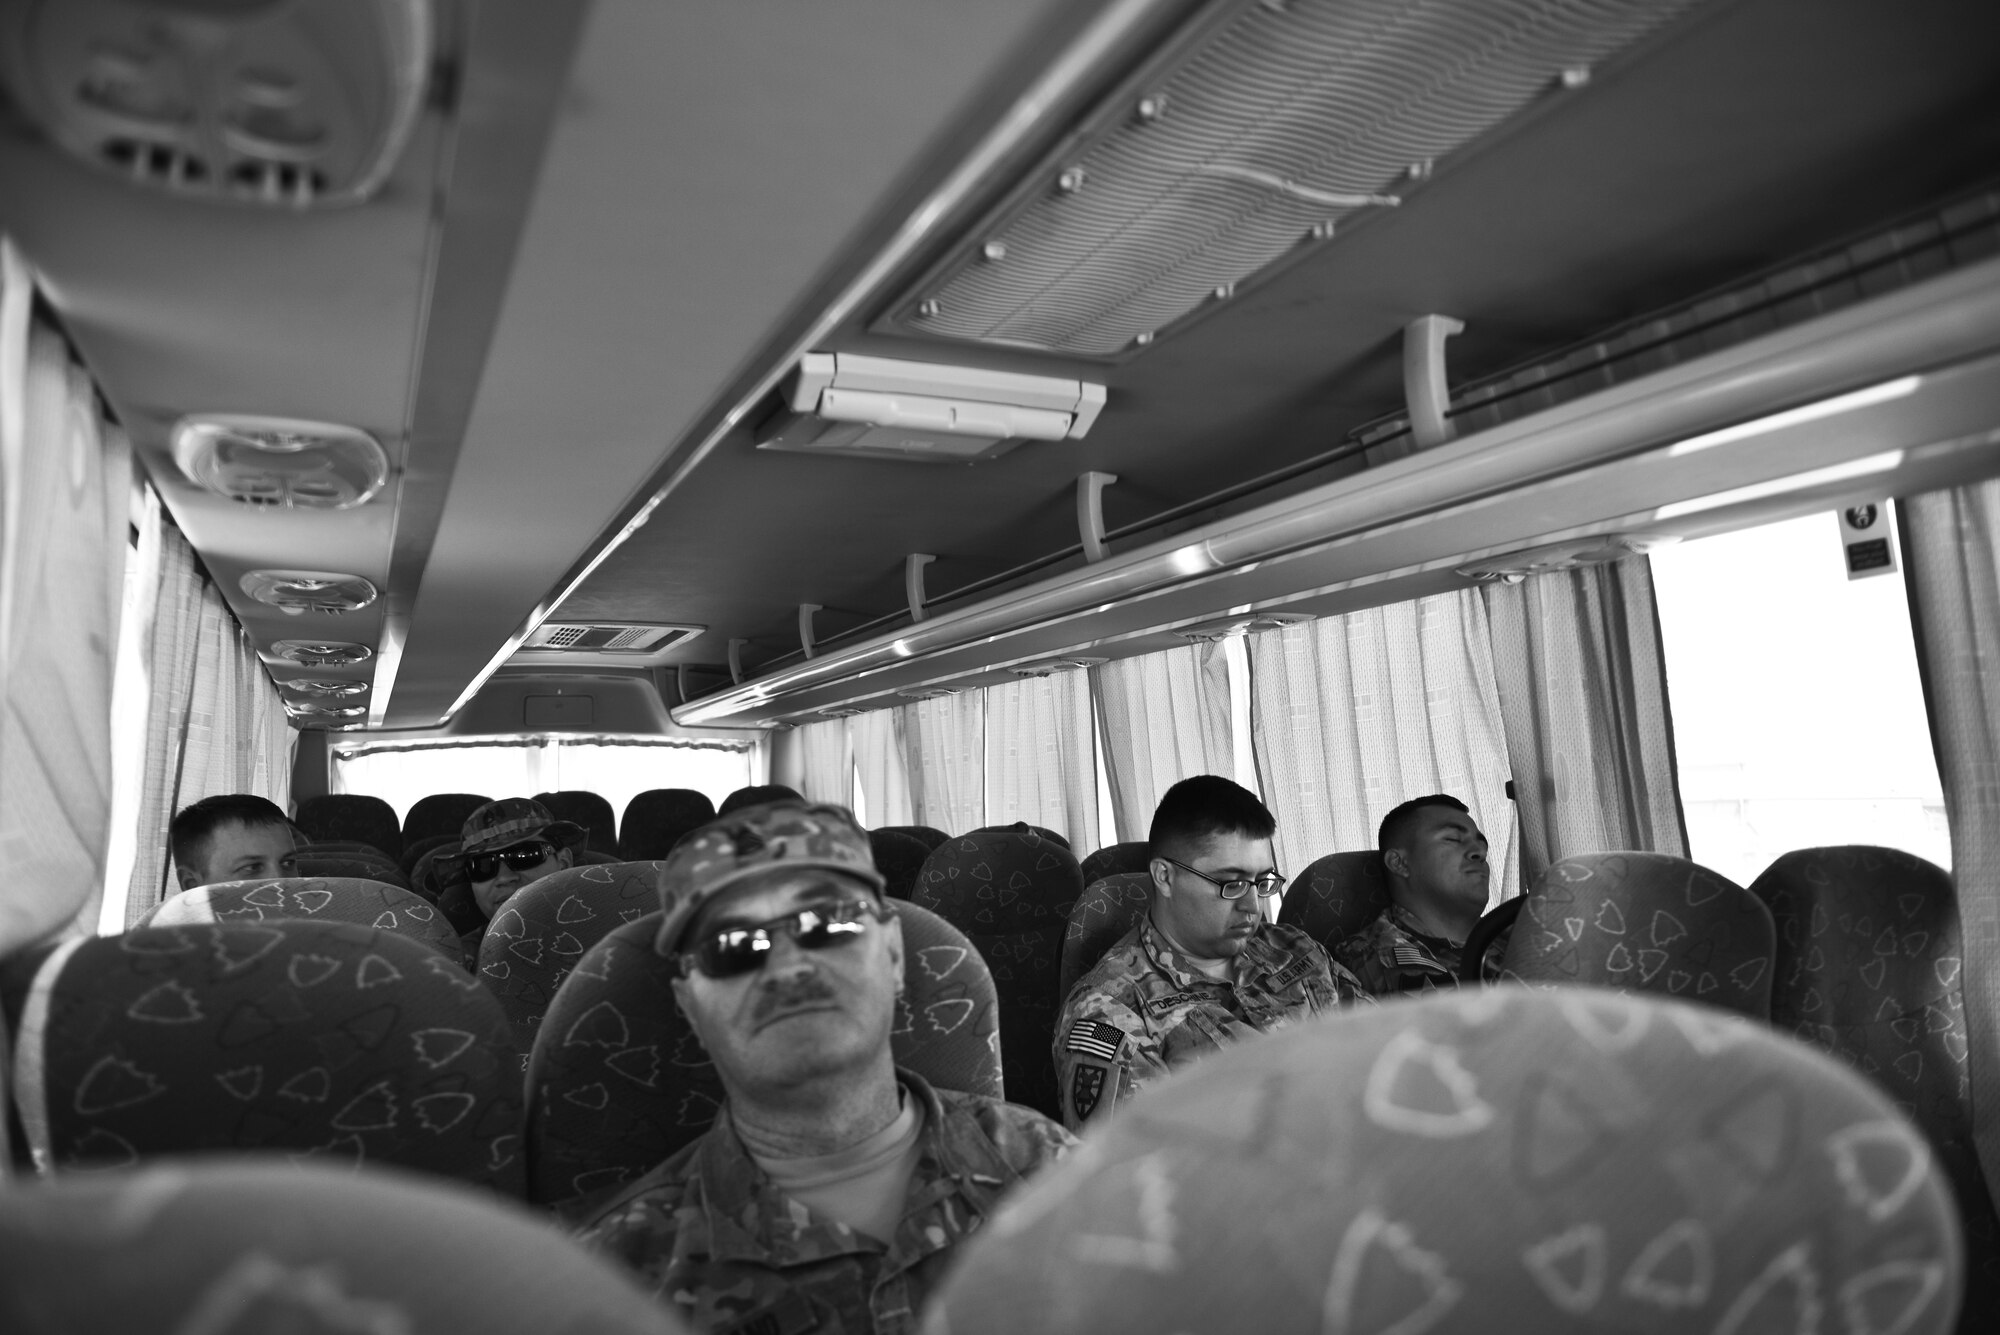 Deployed members from all branches and services use the public transportation provided by the 379th Expeditionary Logistics Readiness Squadron June 30, 2015 at Al Udeid Air Base, Qatar. The airmen from the 379th ELRS provide public transportation to over 2,500 deployed members from all services and branches on a daily basis to alleviate traffic and provide transportation to living quarters, dining facilities and various work areas.  (U.S. Air Force photo/ Staff Sgt. Alexandre Montes)